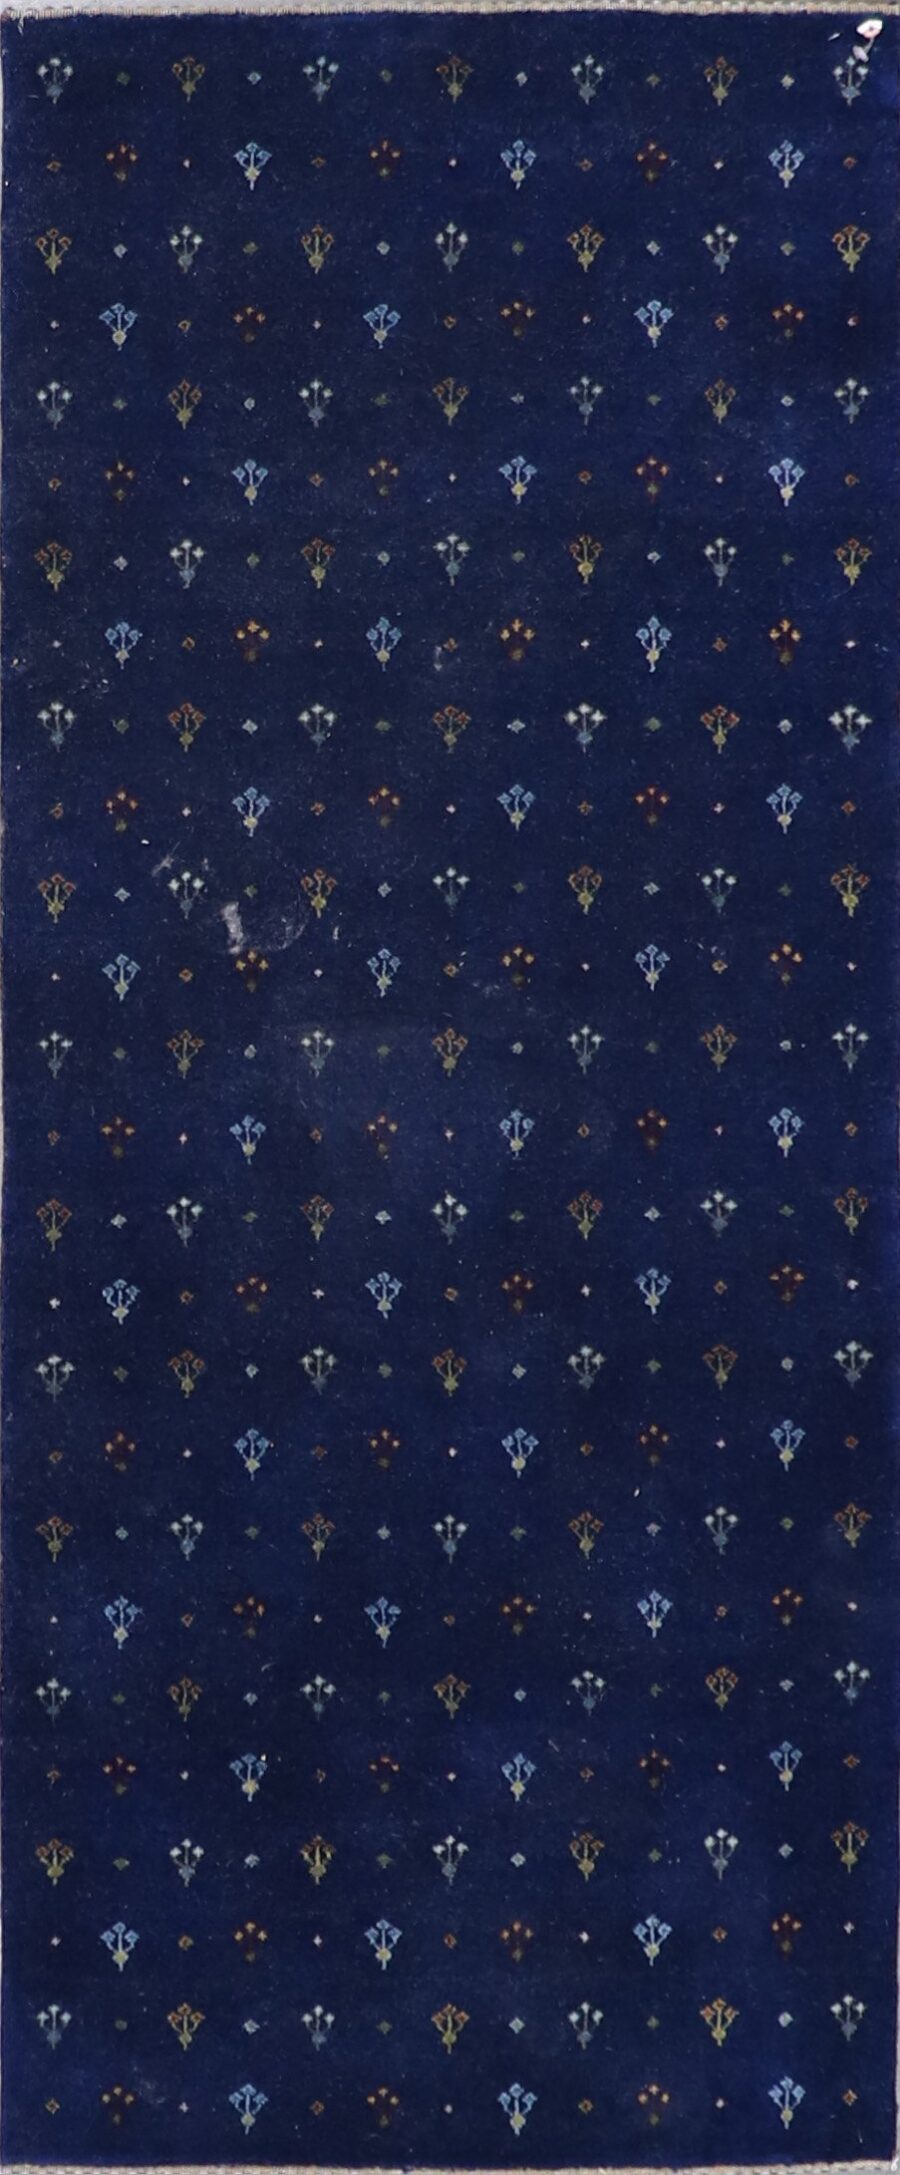 2’7”x10’ Transitional Navy Wool & Silk Hand-Knotted Rug - Direct Rug Import | Rugs in Chicago, Indiana,South Bend,Granger